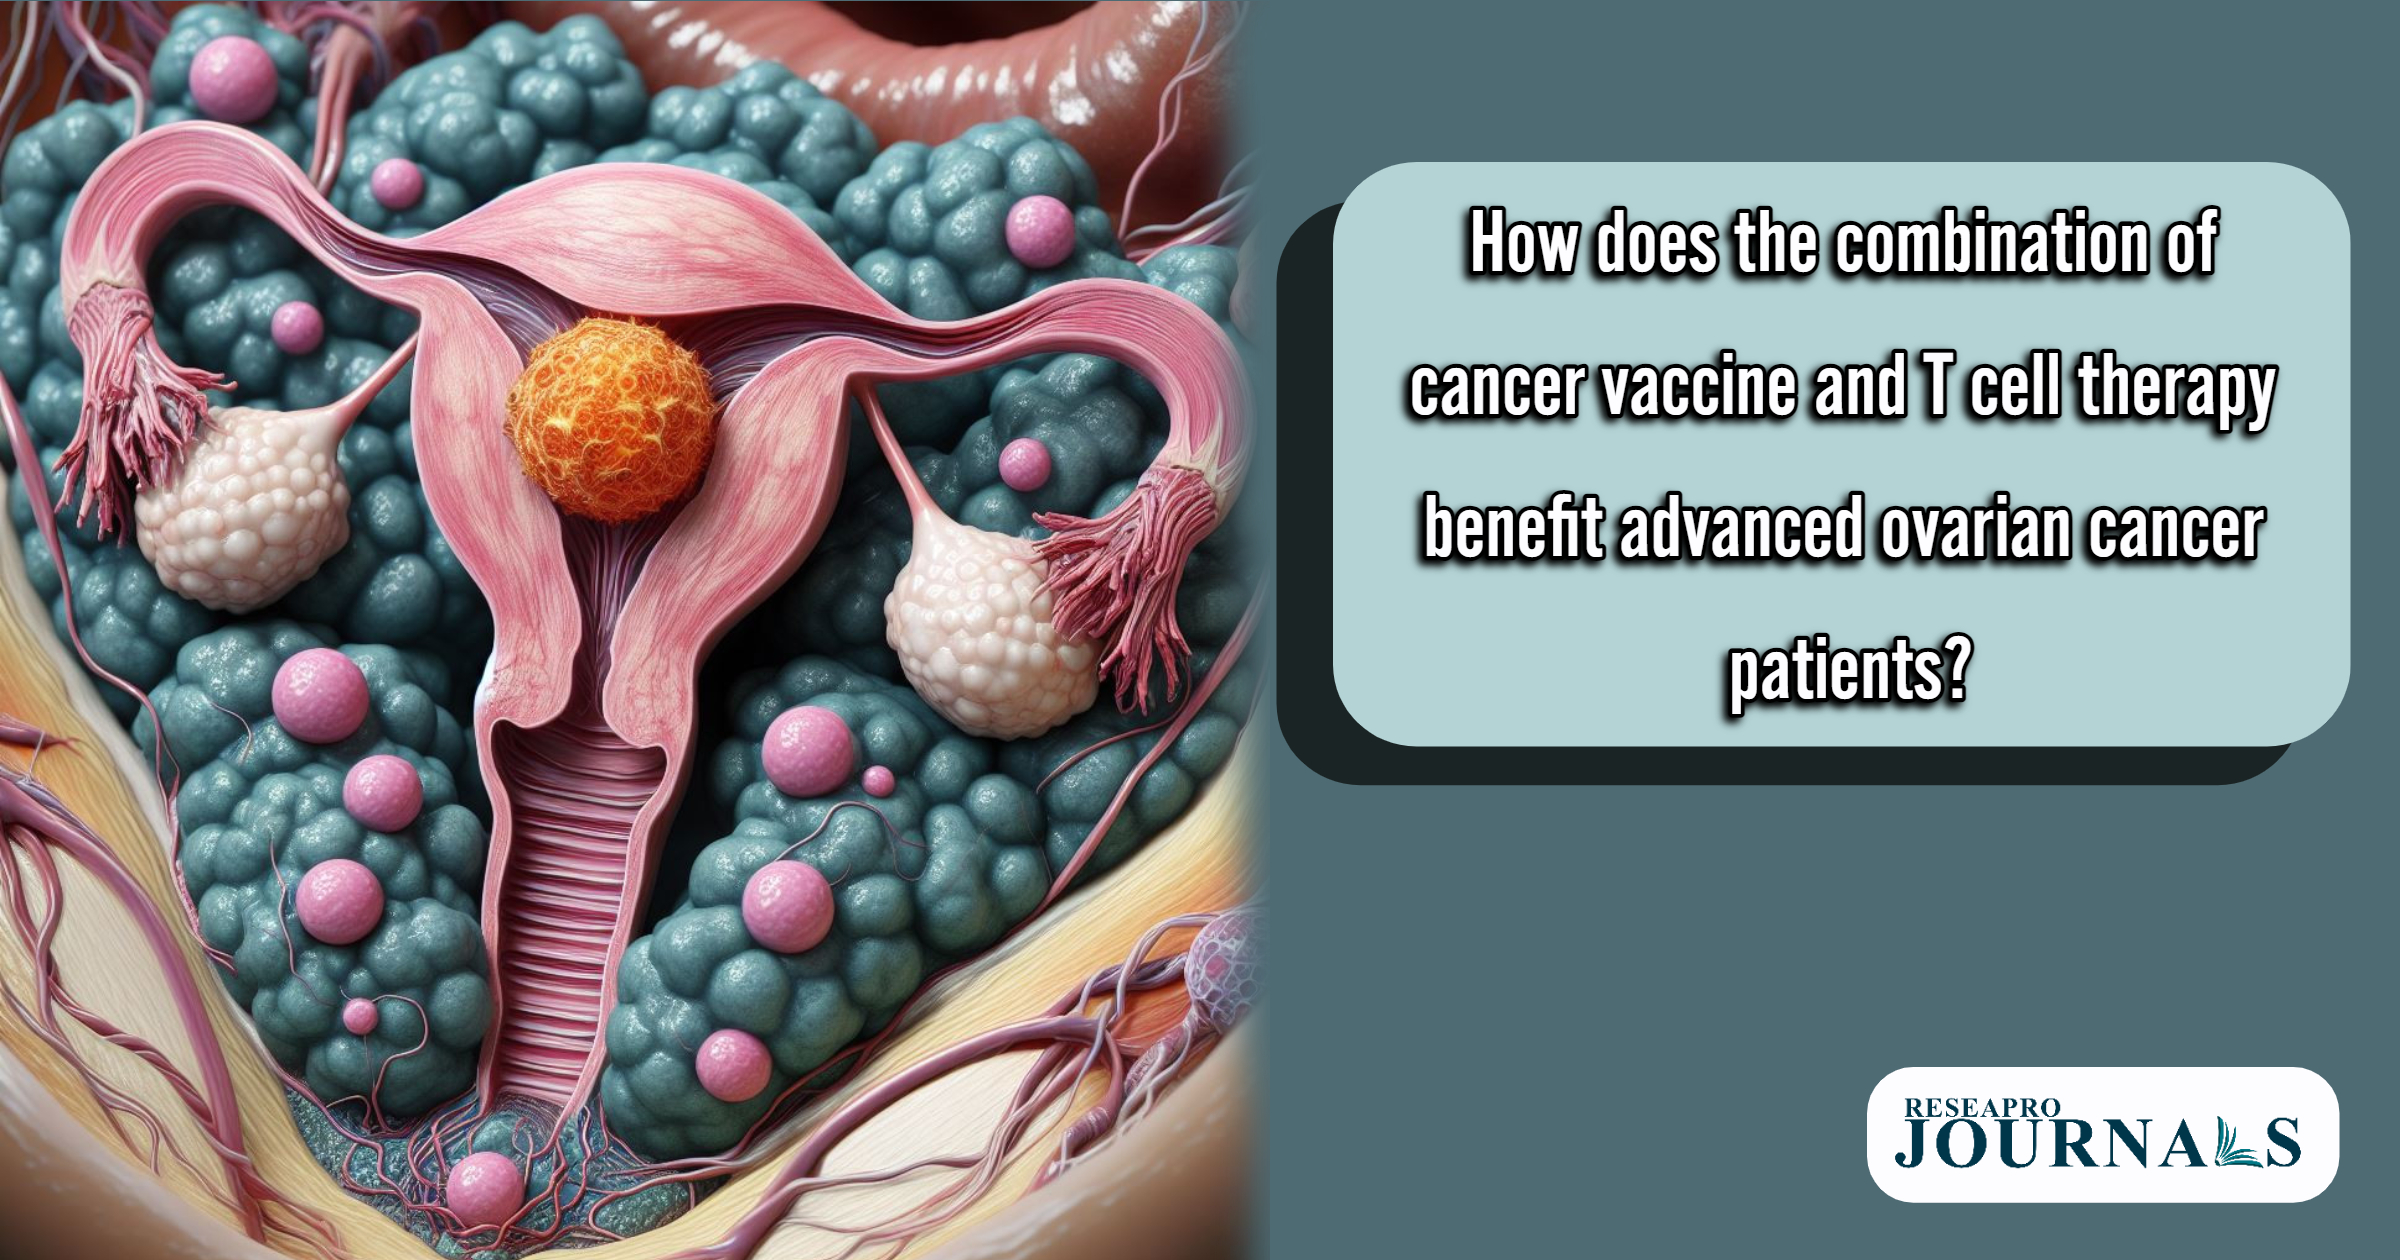 Revolutionizing ovarian cancer treatment: Immunotherapy’s promising combo for patients.